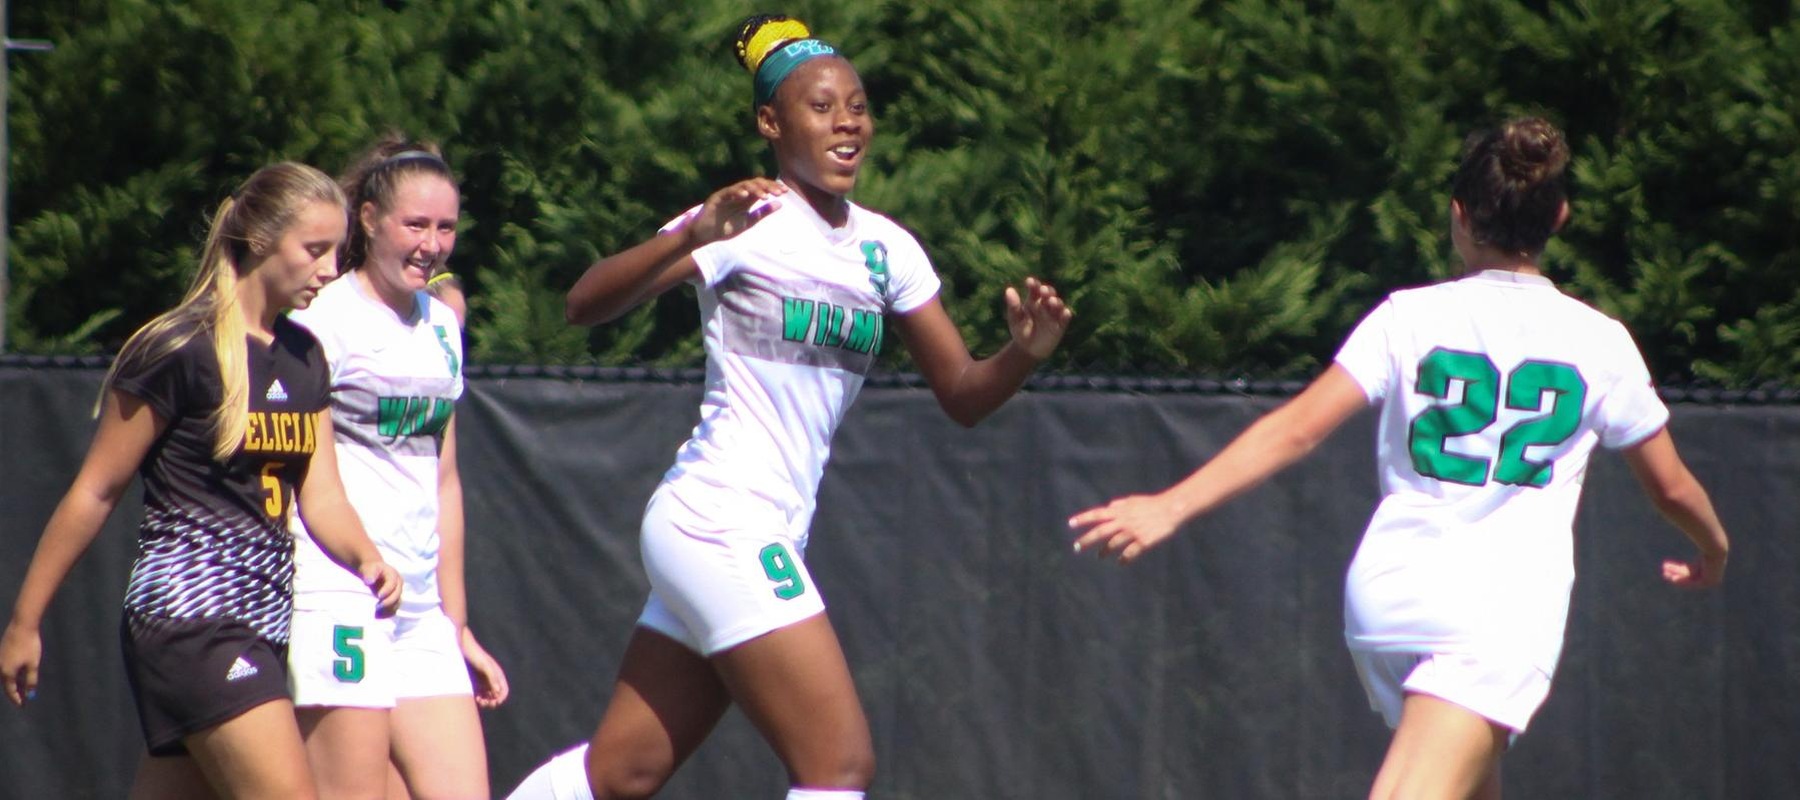 Wilmington University’s Rockesha Dayes (9) celebrates with Justine Sommer (20) after scoring a goal against Felician College during their NCAA division II soccer match at the Wilmington University sports complex, Saturday September 21, 2019. Photo by Julius Mickens.